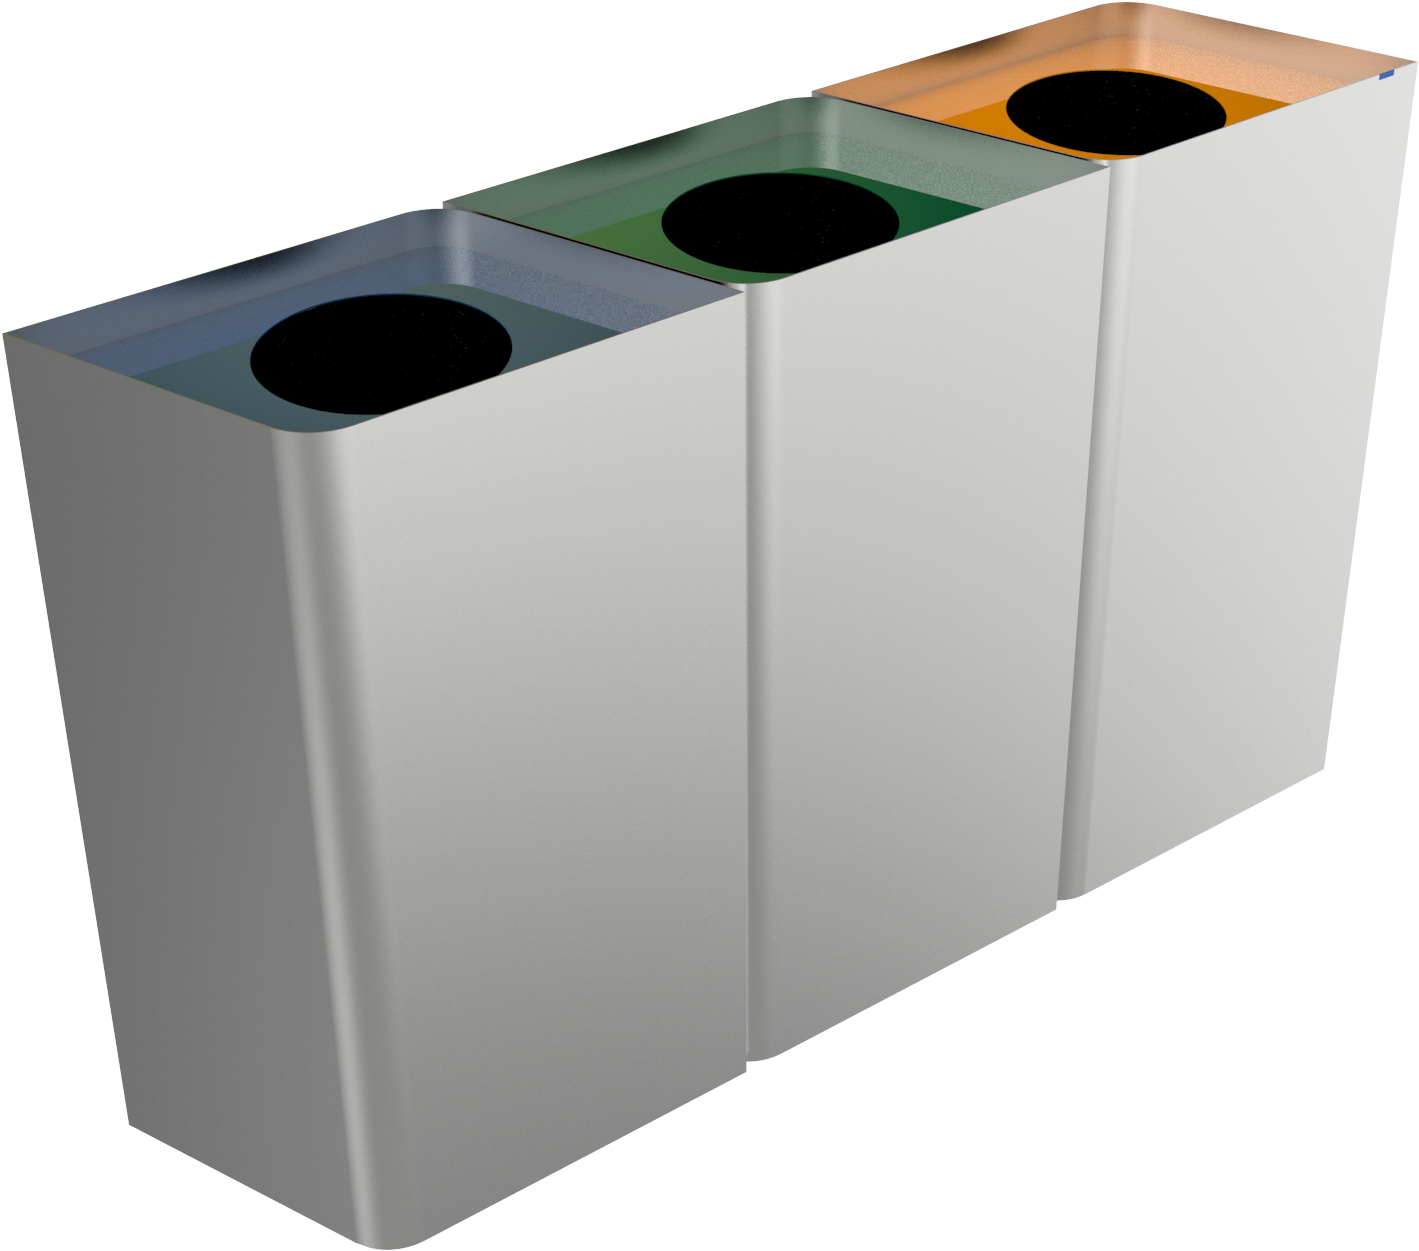 Stainless Steel Recycle Bins Modern Design - Stainless Recycle Bin, Hd Png Download